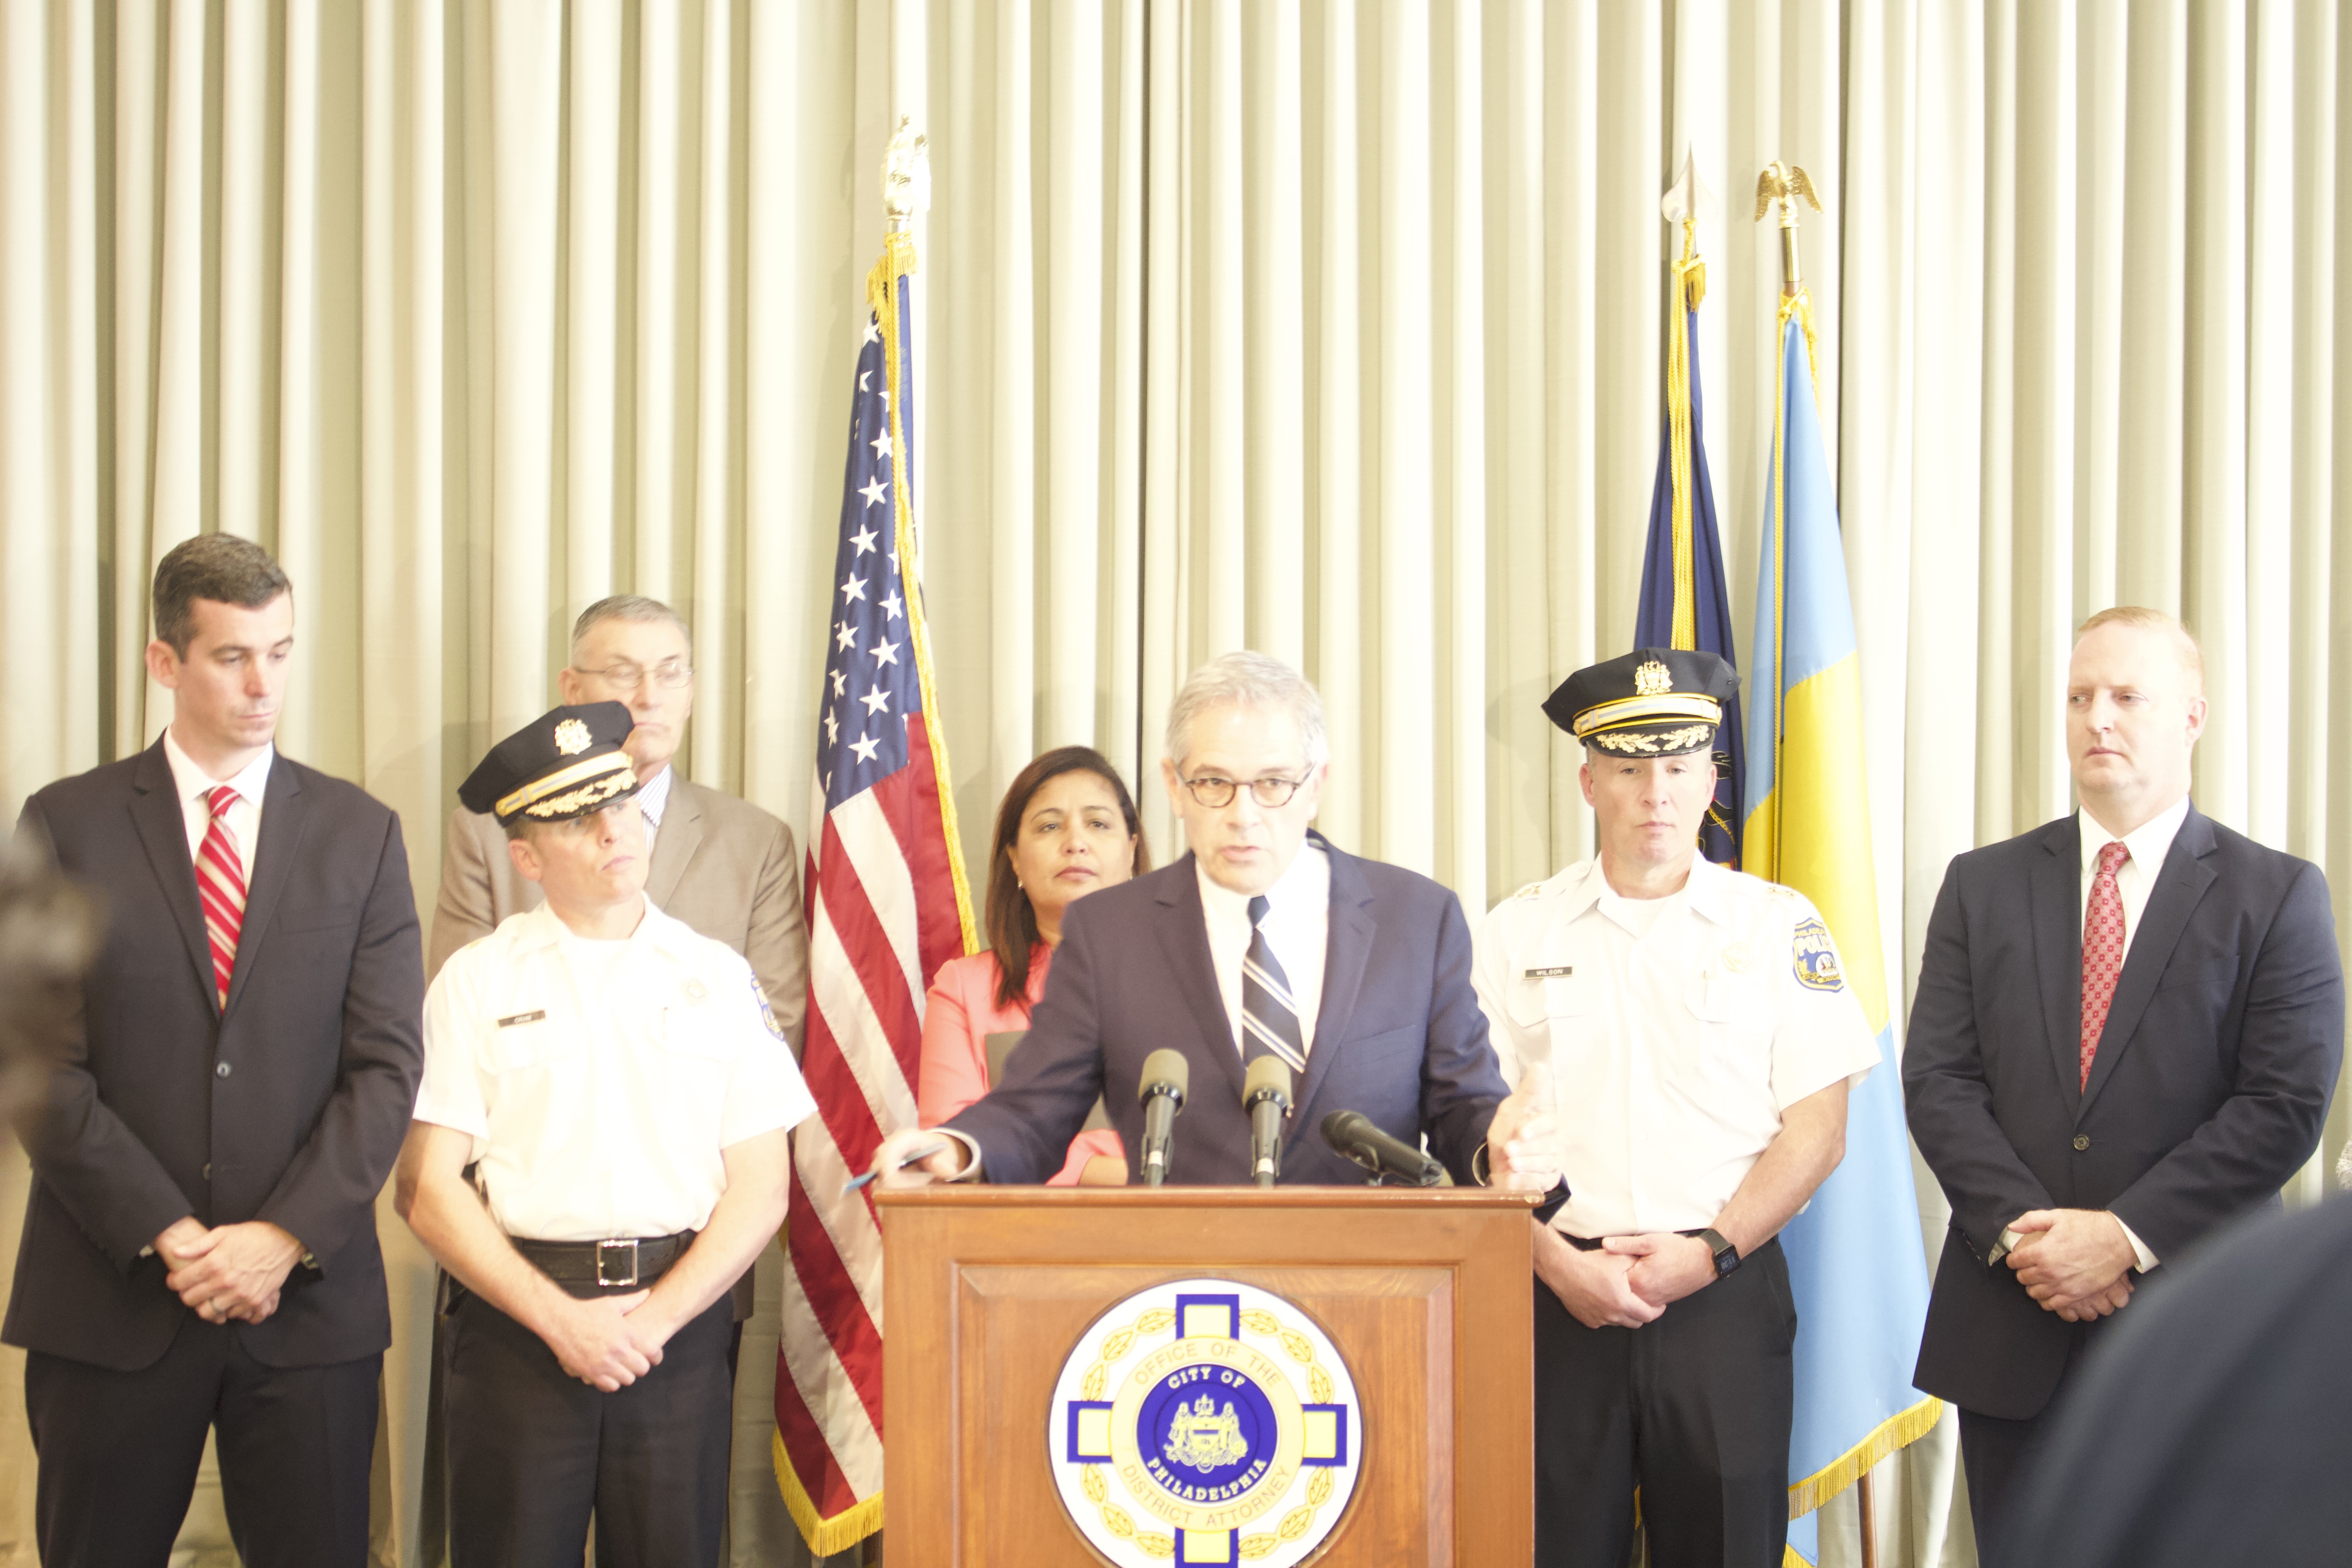 Philadelphia District Attorney announces the arrest of more than 57 individuals in connection with a powerful drug trafficking ring in Kensington